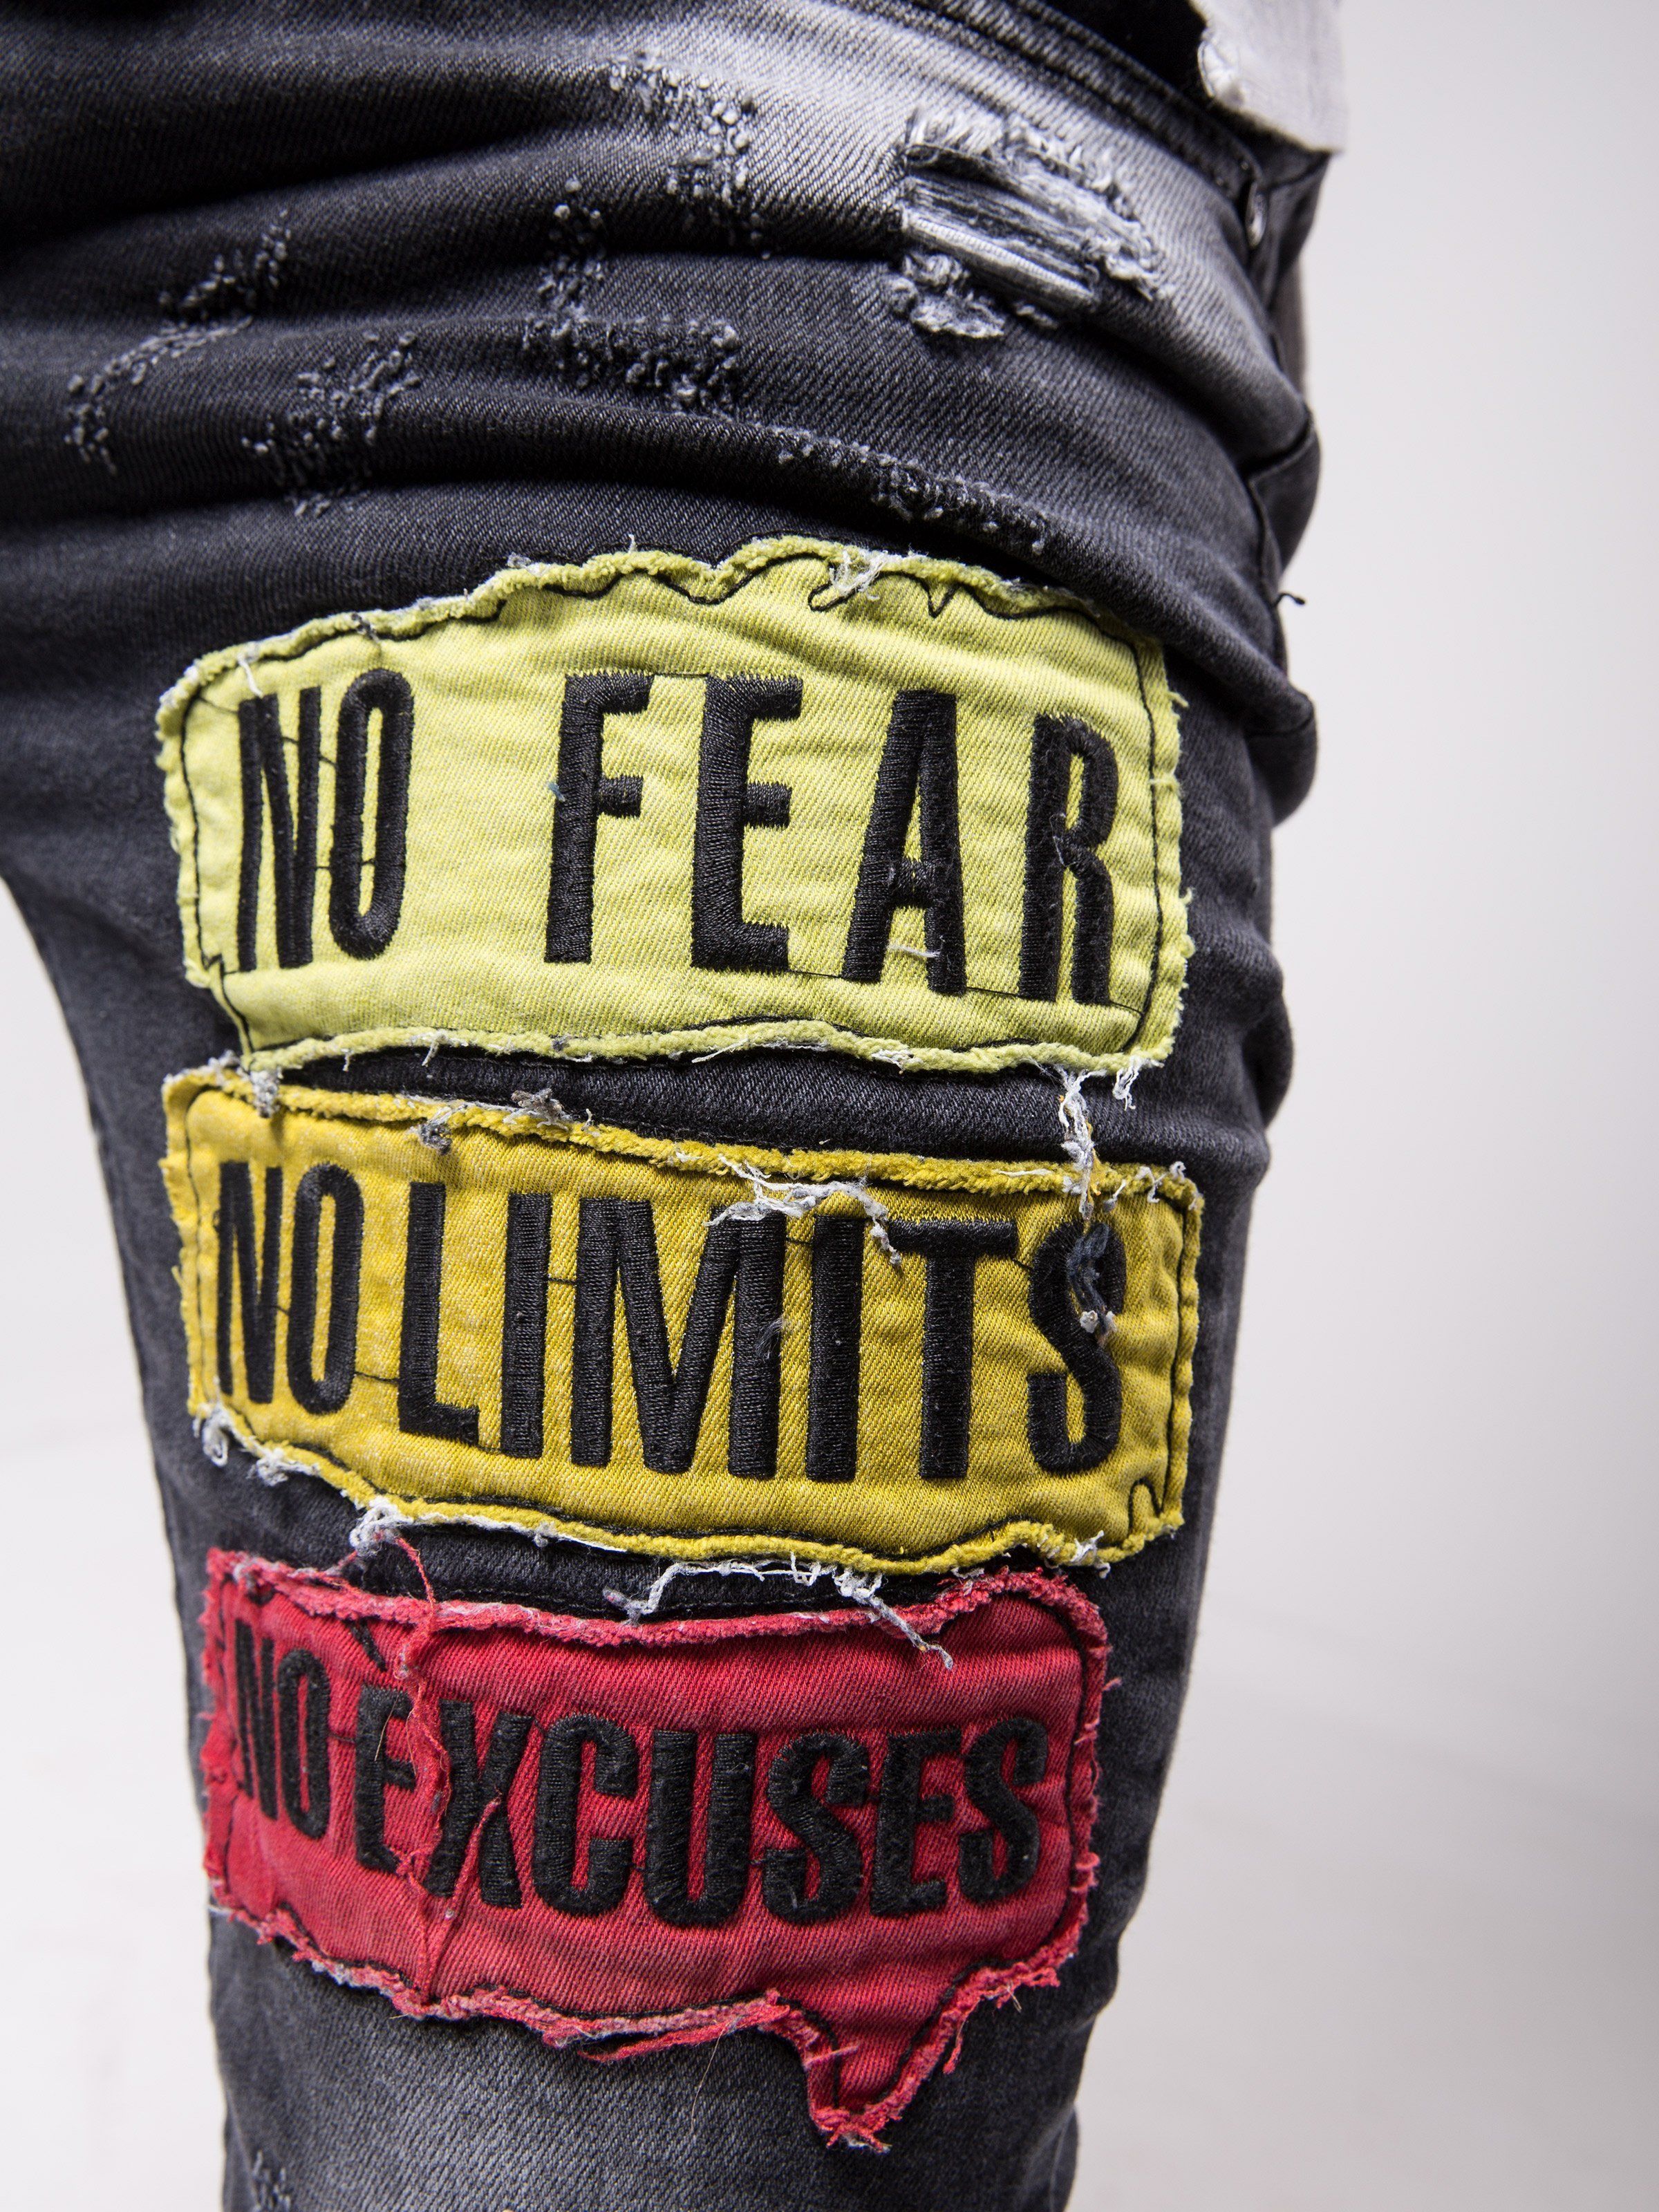 A pair of FEARLESS skinny fit jeans with a patch that says no fear no limits.